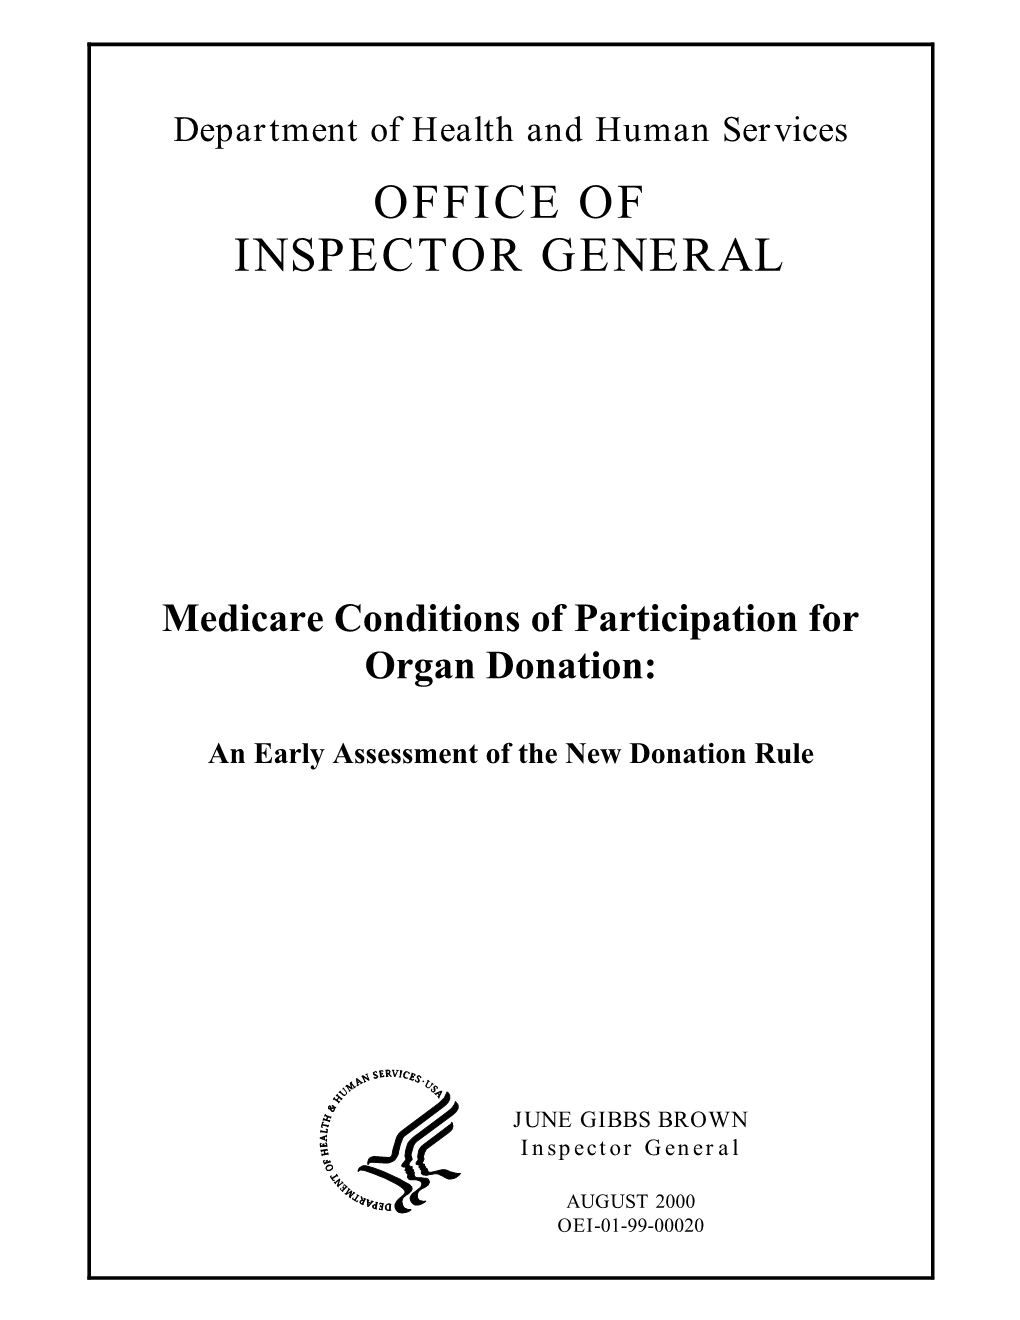 Medicare Conditions of Participation for Organ Donation